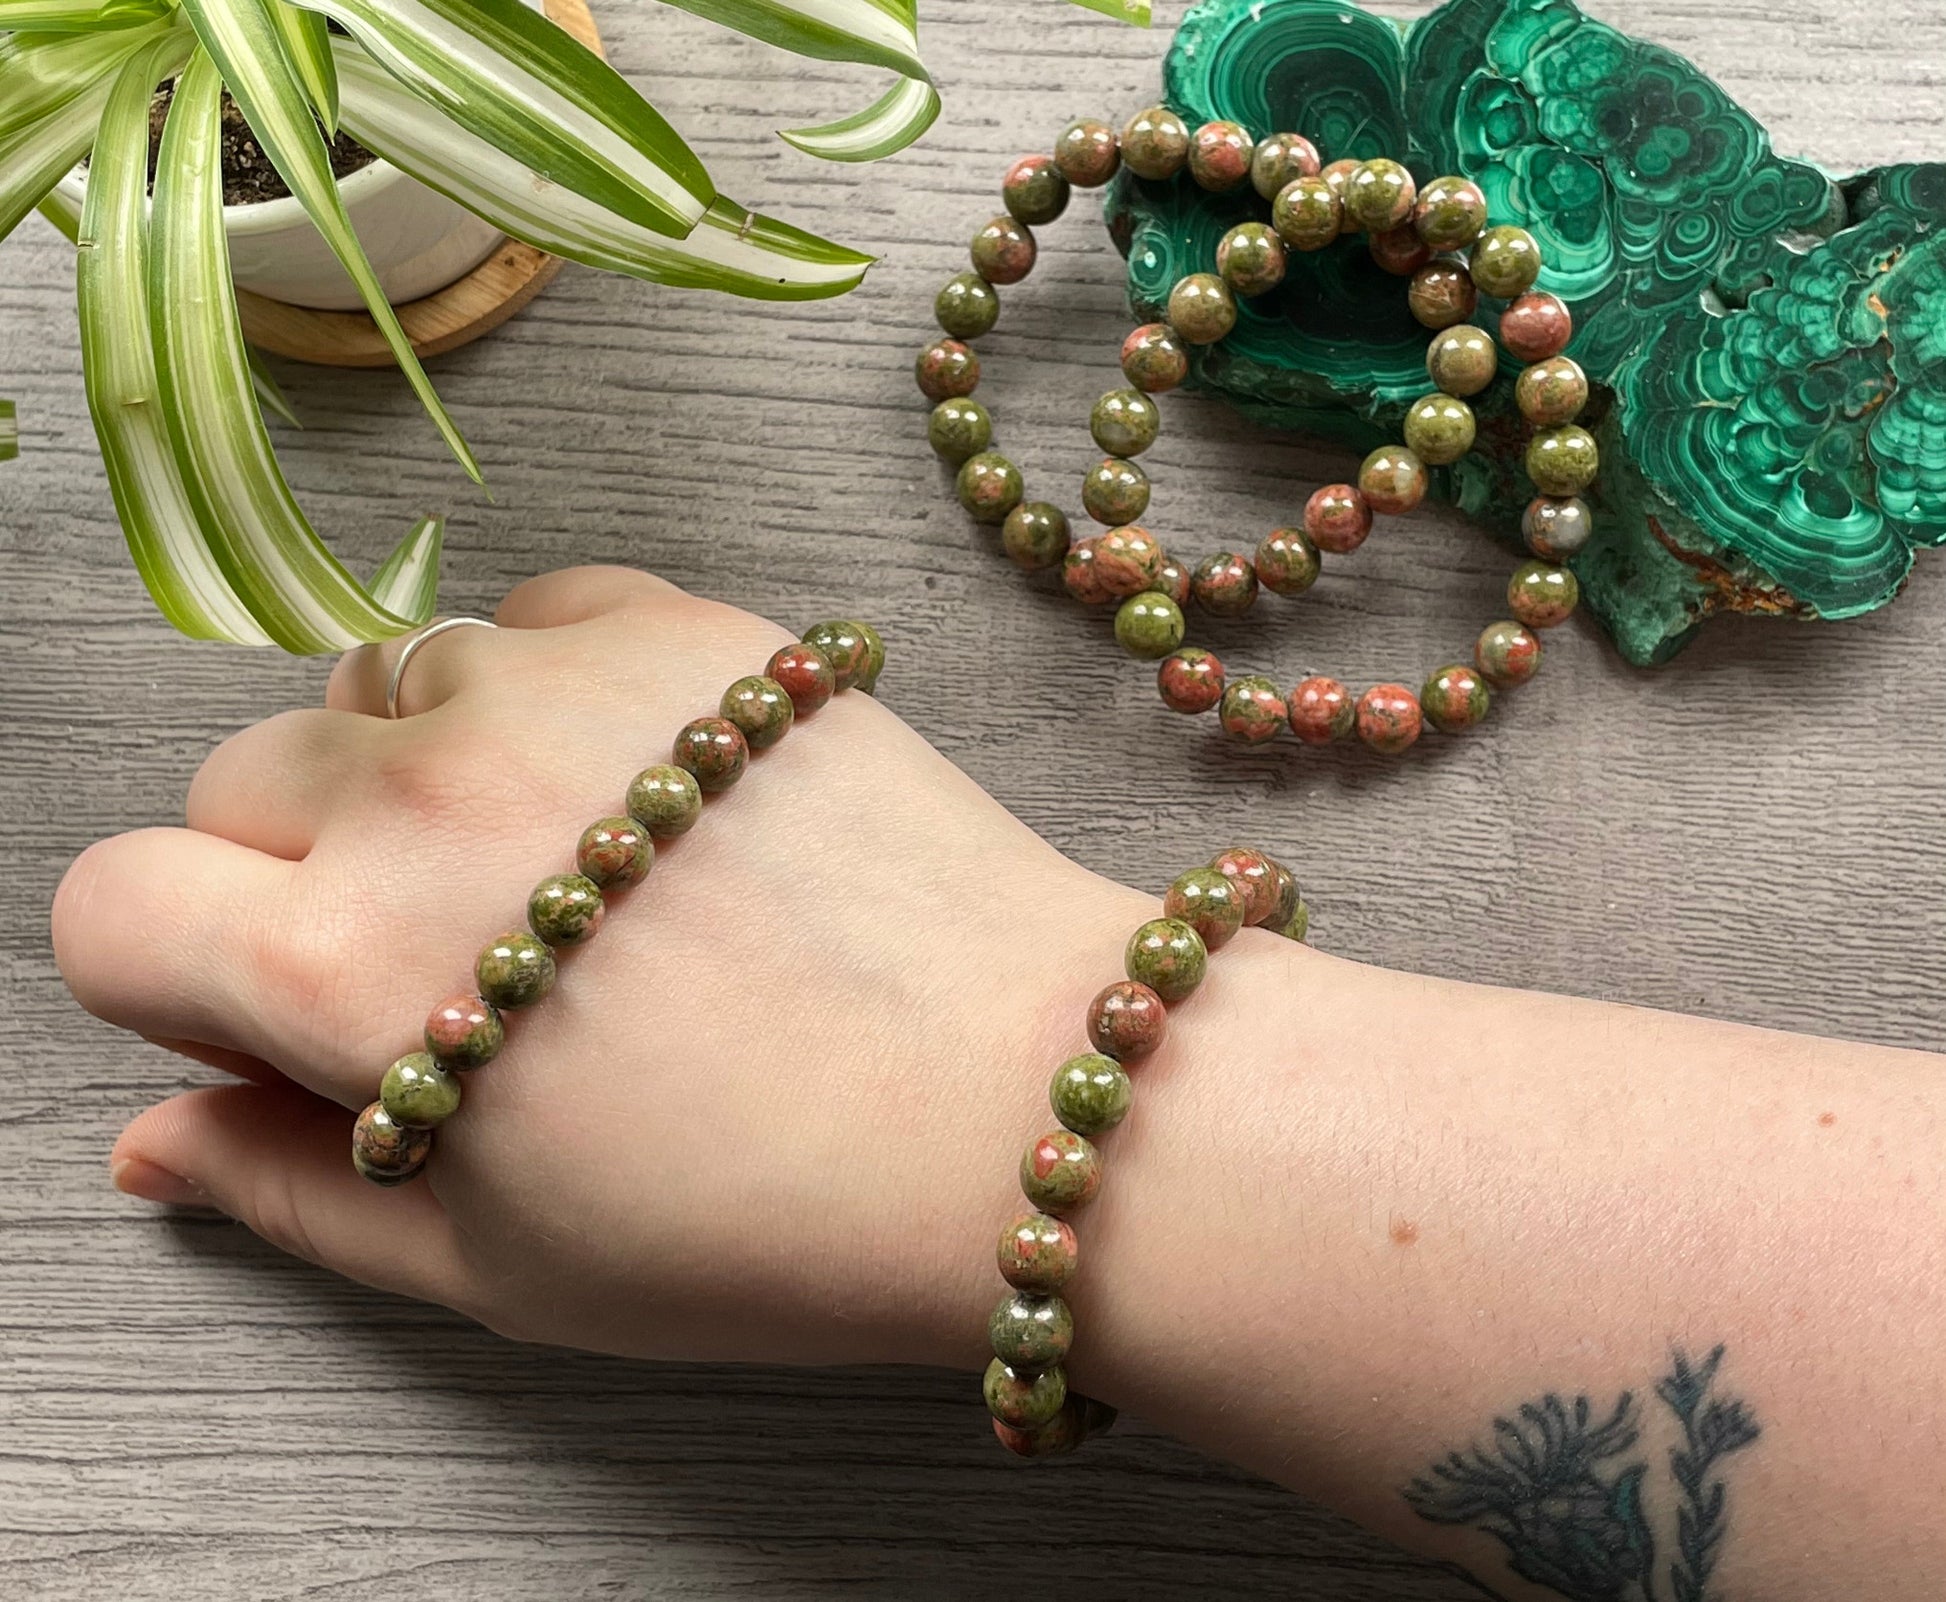 Pictured is a unakite bead bracelet.